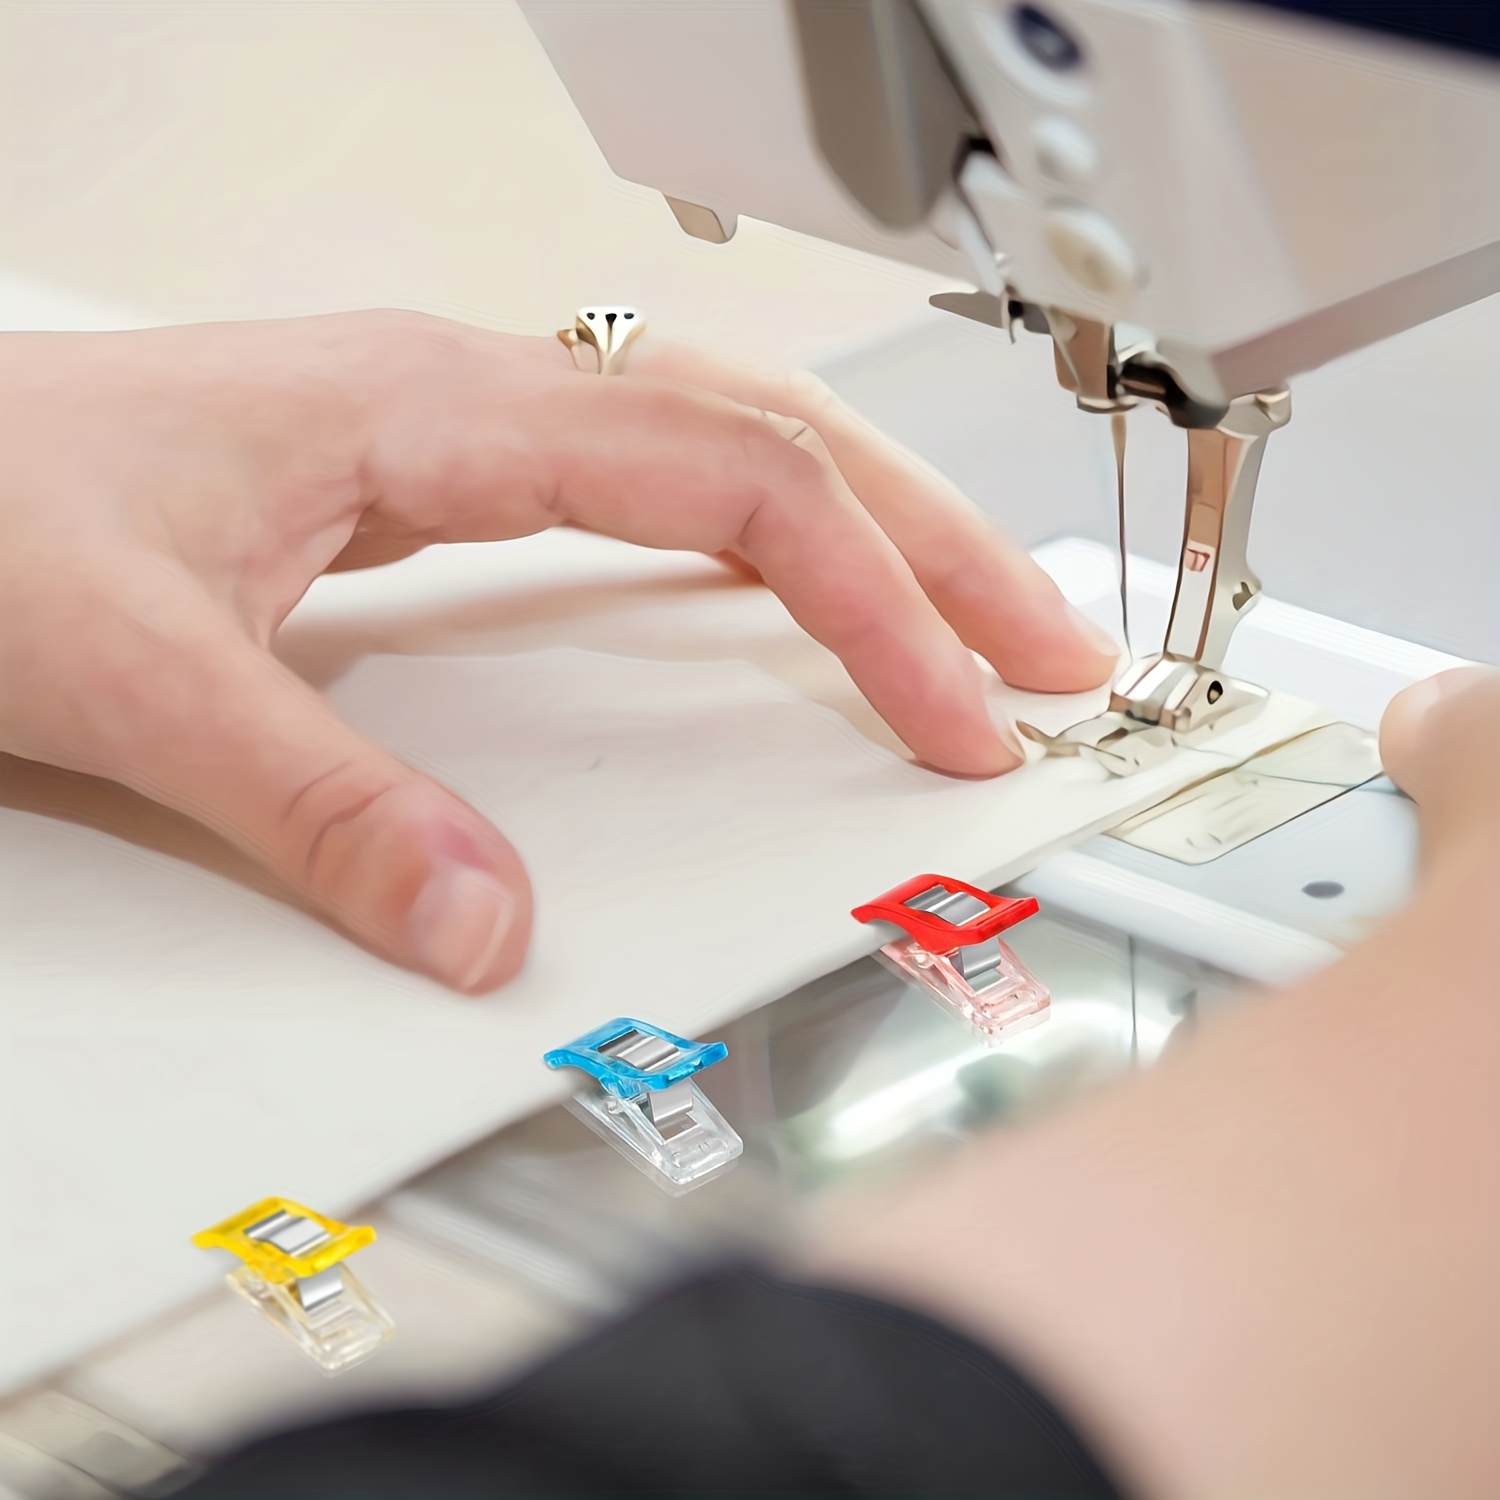 5 amazing sewing gadgets 